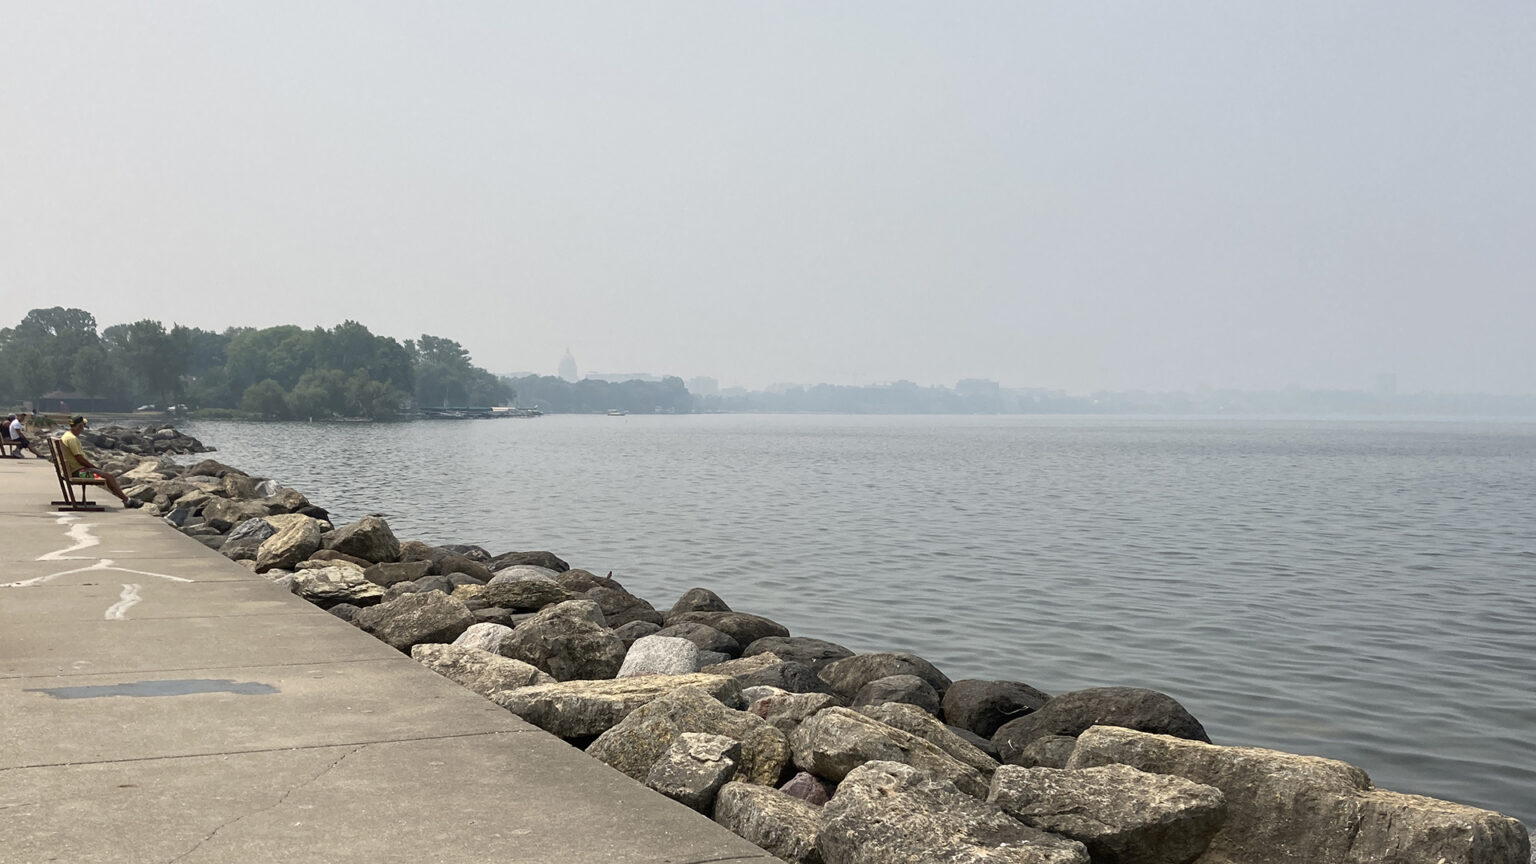 People sit on park benches on a concrete walkway atop a stone breakwater in a lake, with trees and skyline on a receding shoreline obscured by haze and smoke in the air.